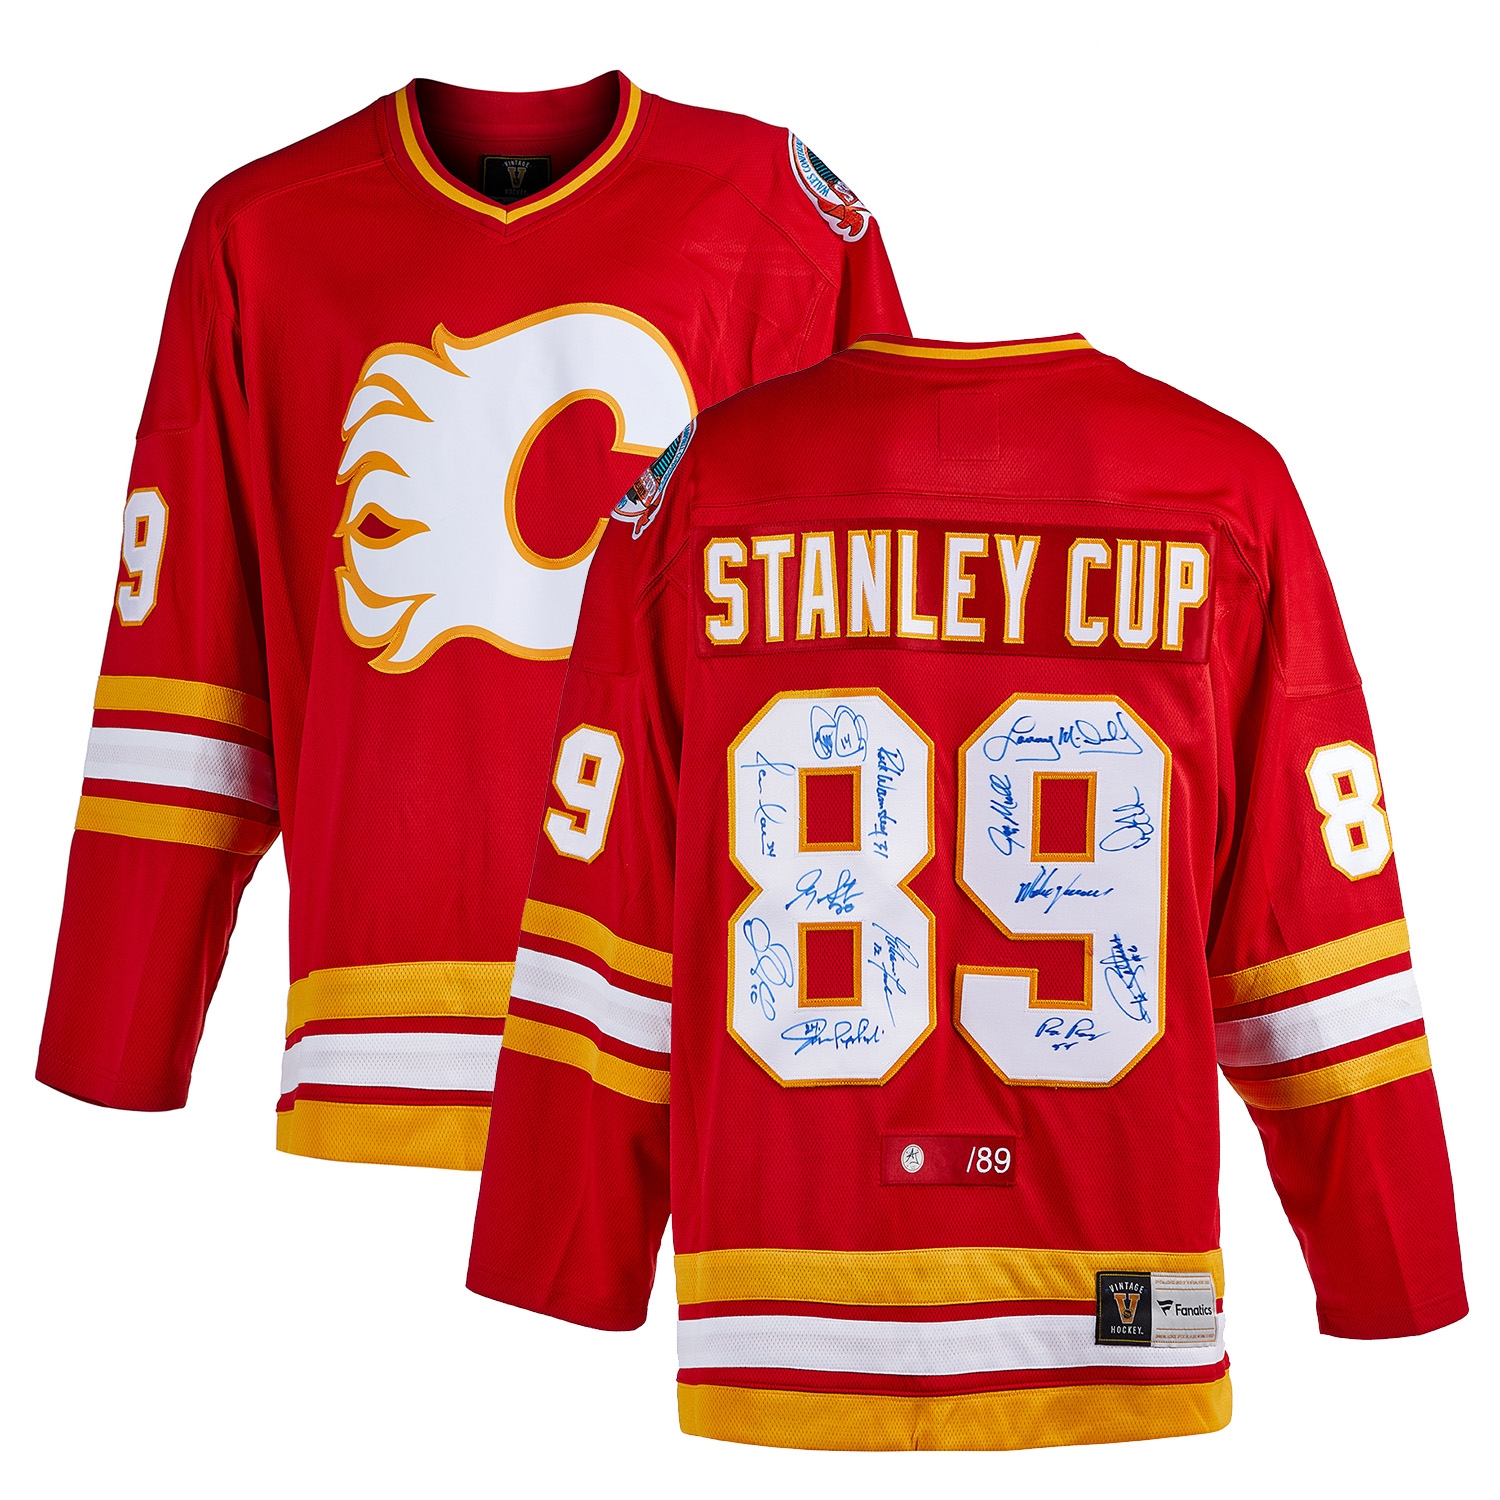 1989 Calgary Flames Team Signed Stanley Cup Vintage Jersey #/89